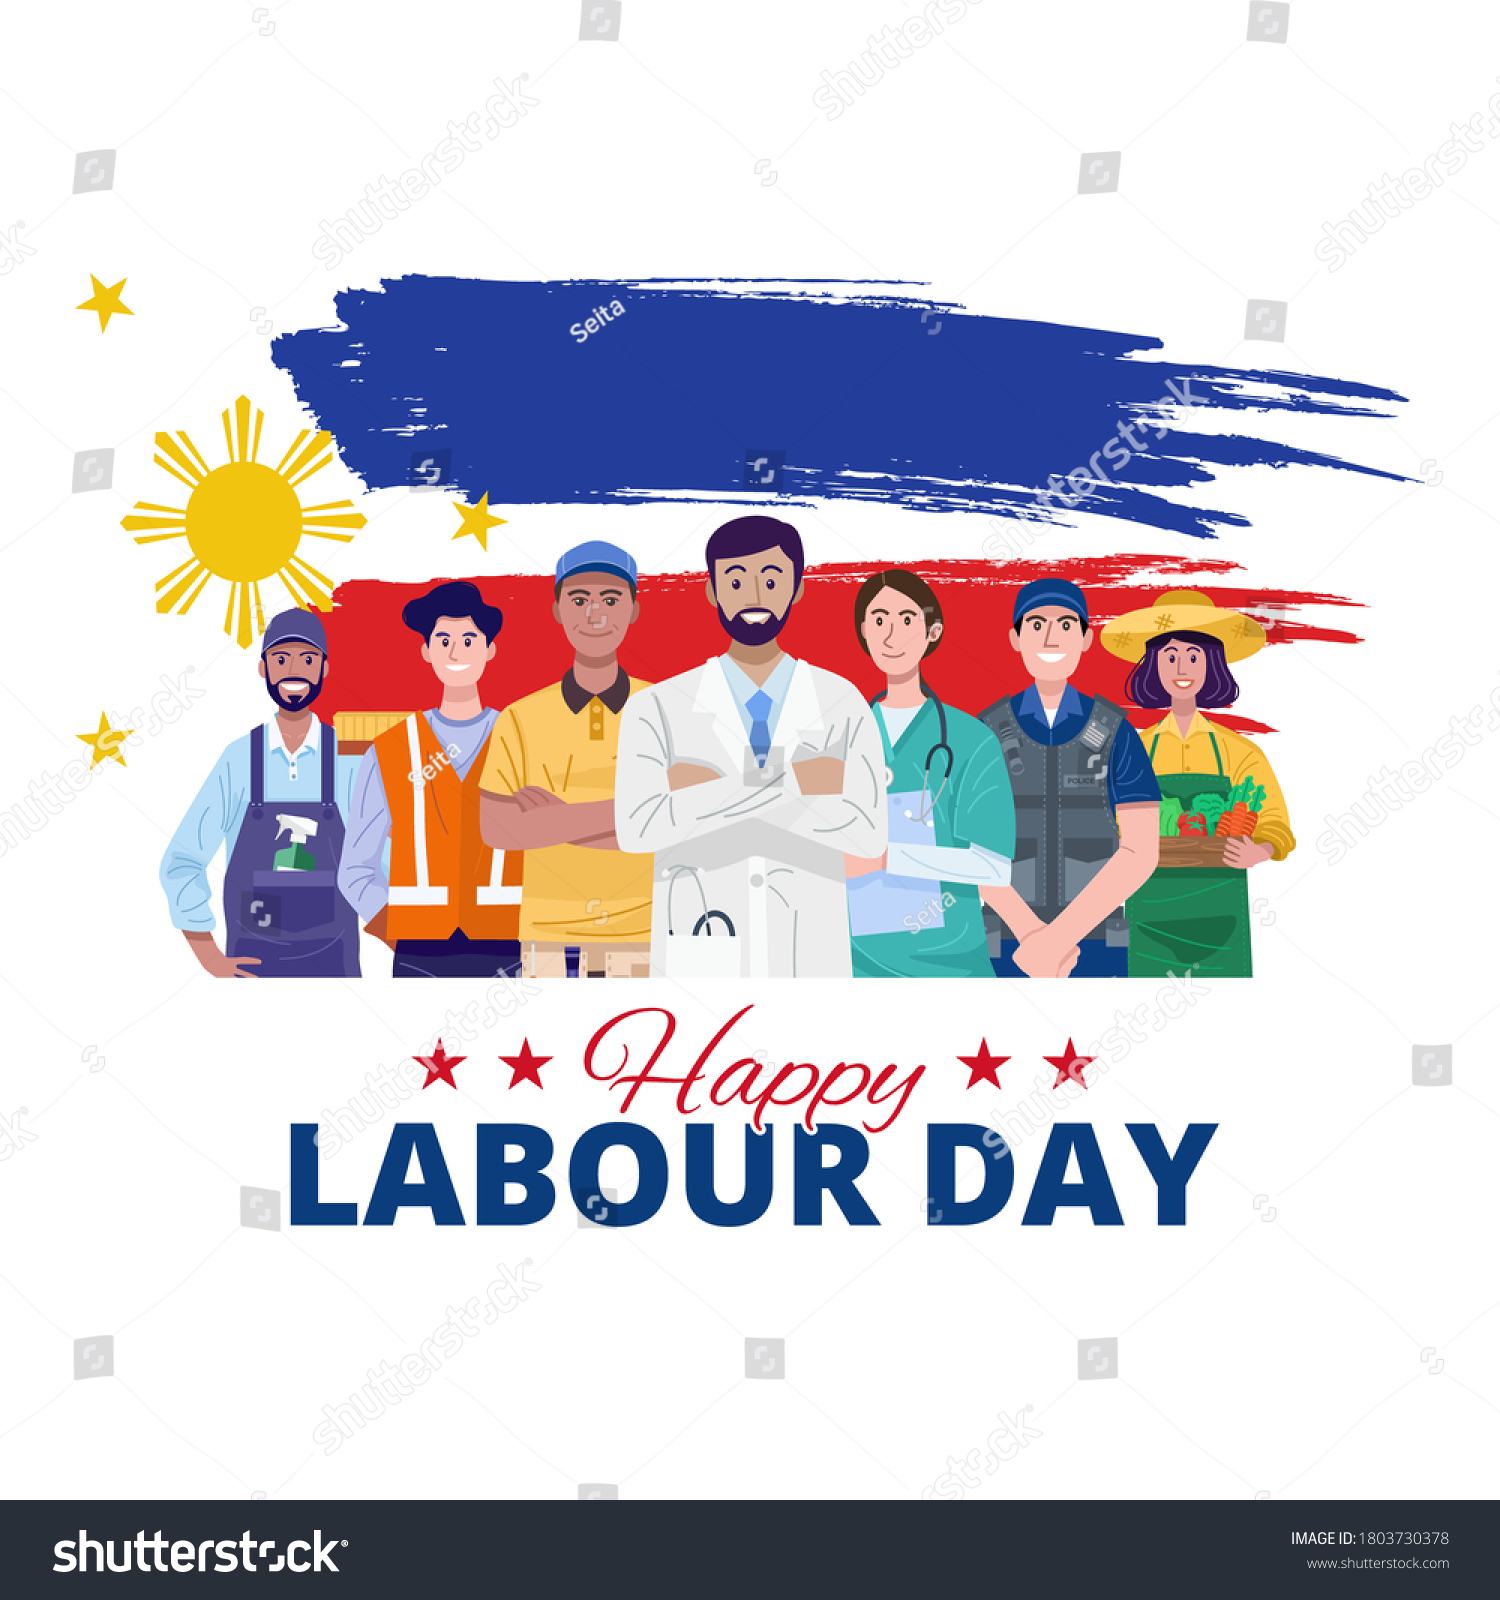 1 038 Labor Day Garbage Images Stock Photos Vectors Shutterstock